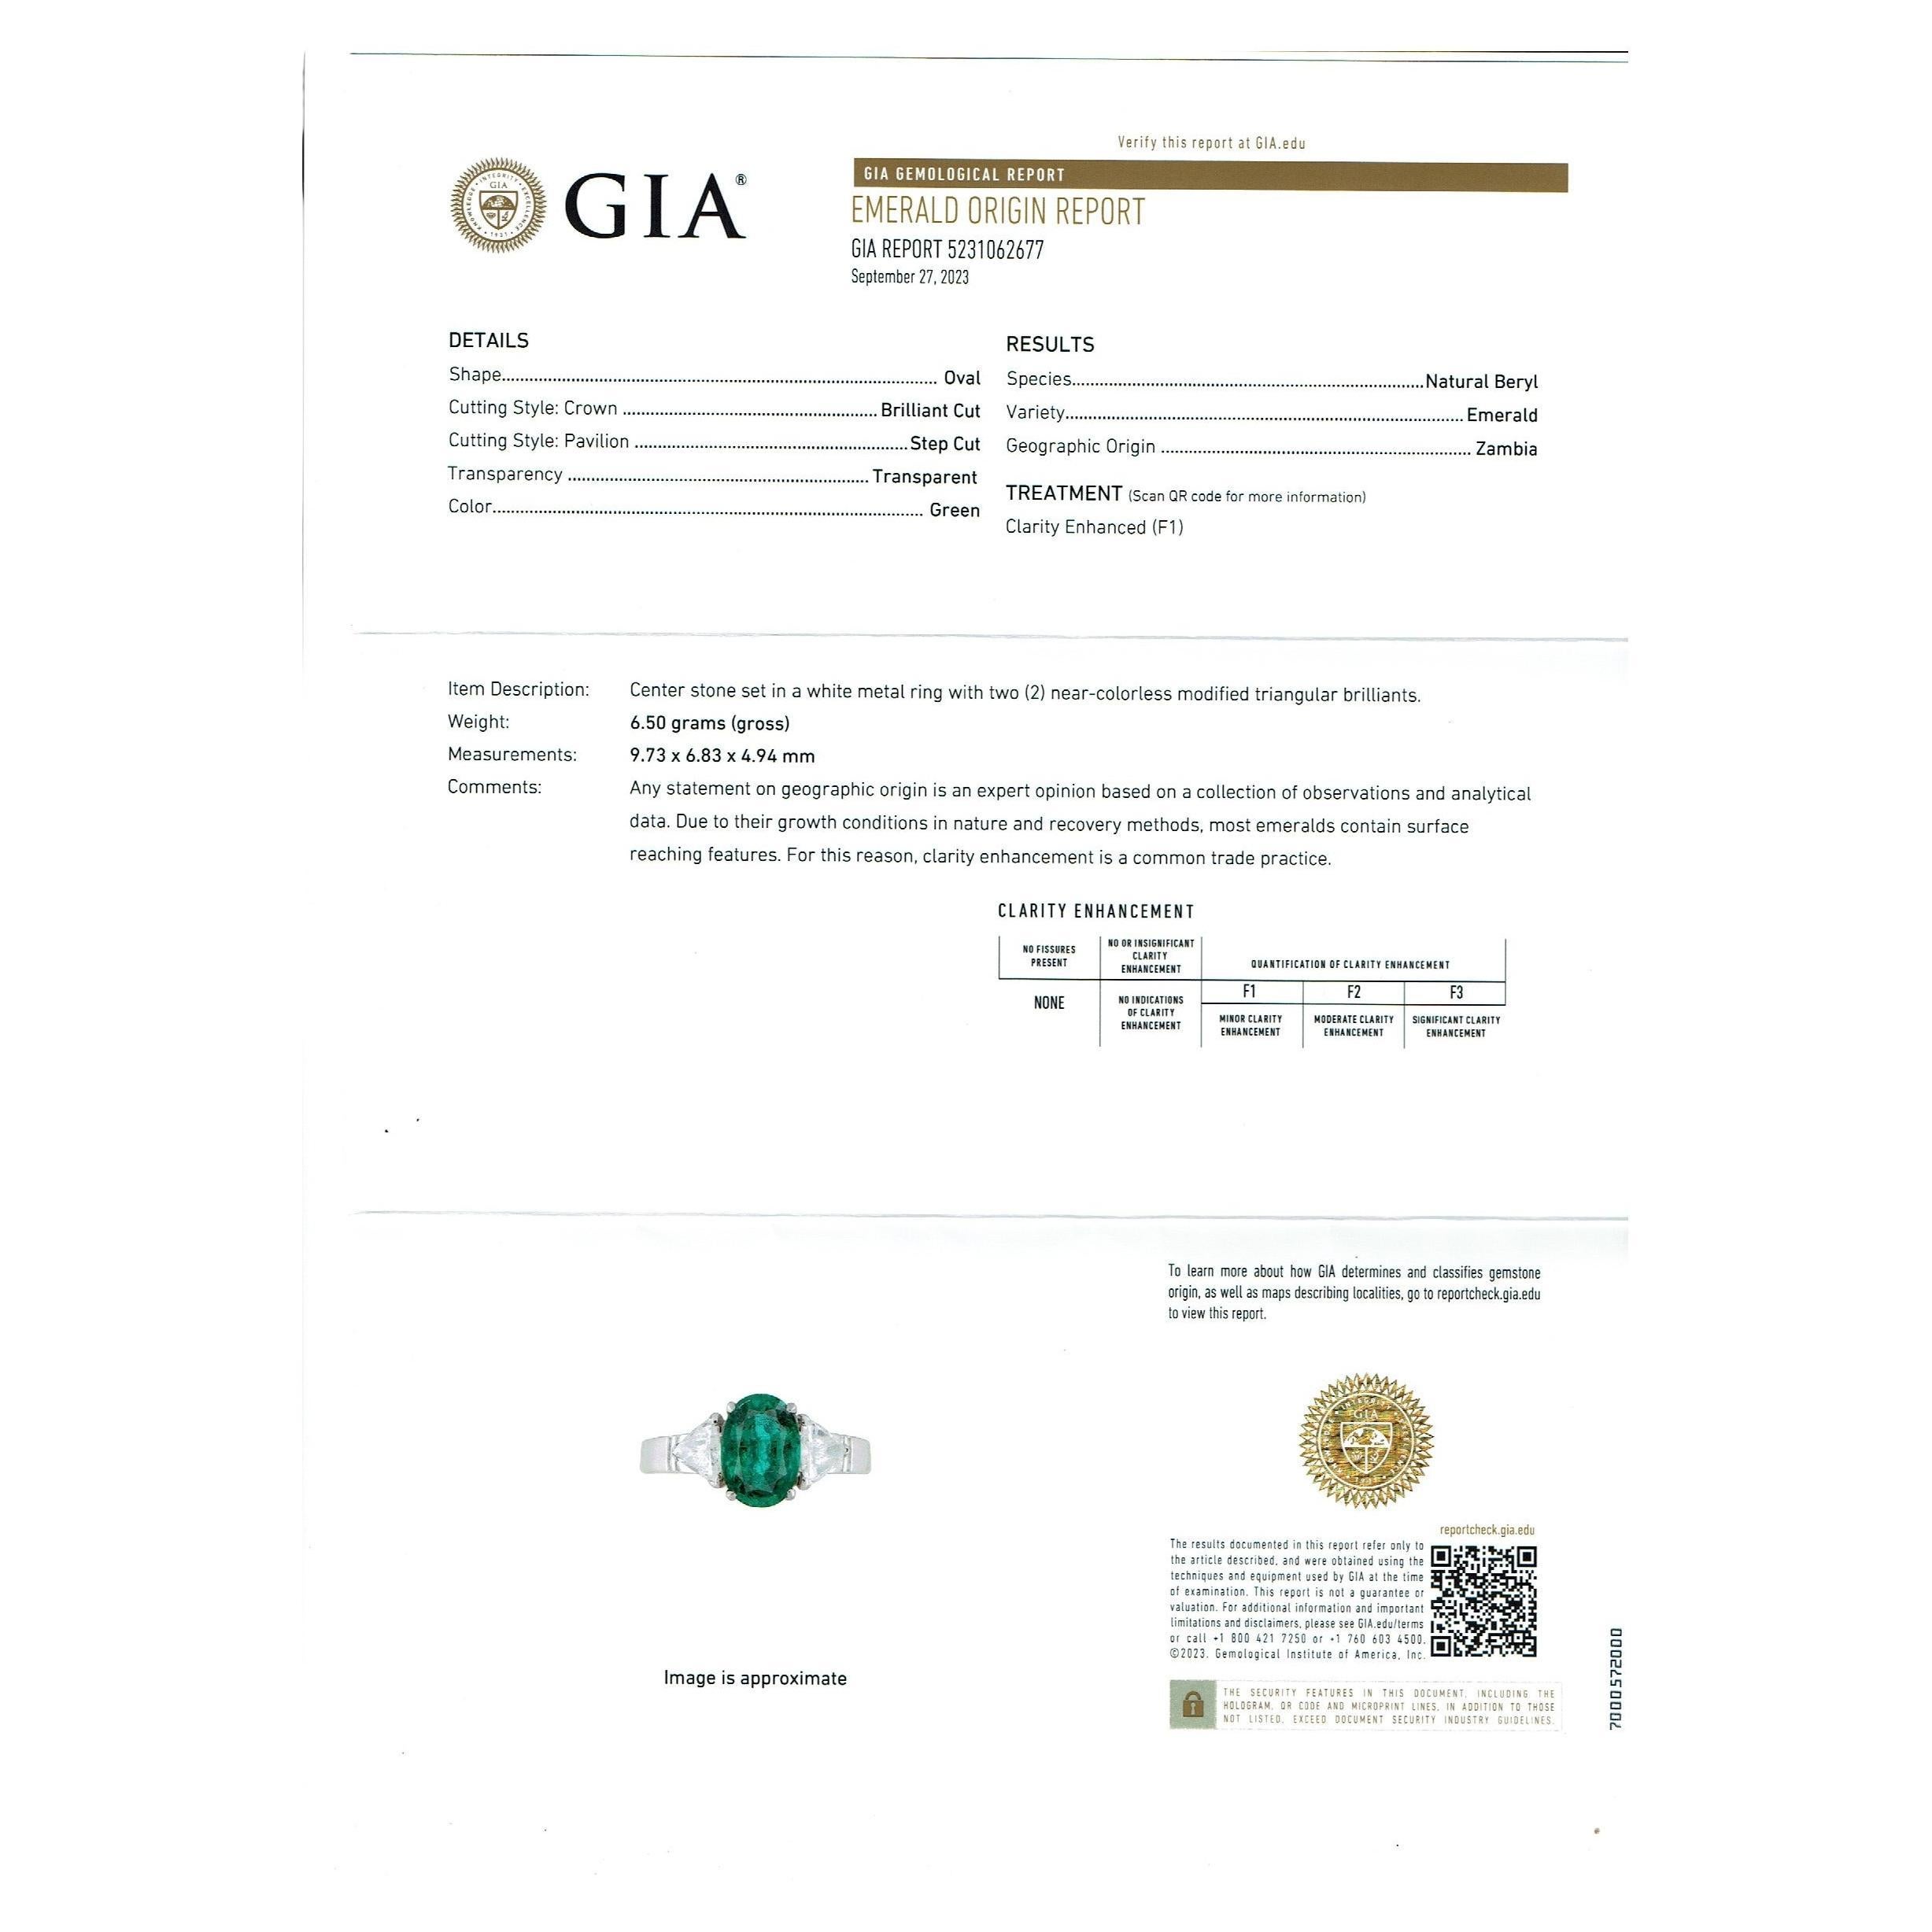 GIA Certified 2Ct Fine Zambian Emerald & 1.02 Ct Total Trillion Diamond Ring in platinum
A classic, cocktail  / Engagement ring 
GIA Certified approximately 2 Ct Fine Oval Zambian Emerald & 1.5 Ct total  Trillion Diamond Ring in 18 Karat White